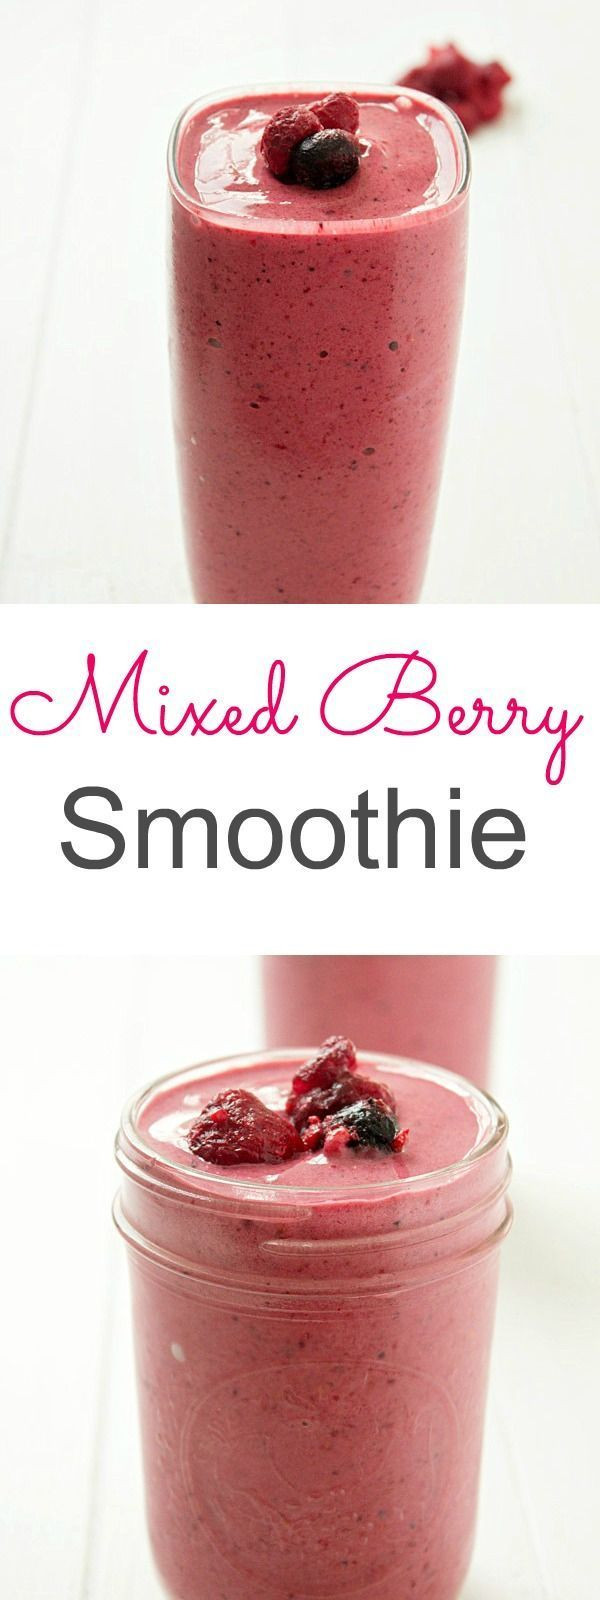 Easy Healthy Smoothies
 Best 25 Frozen berry smoothie ideas on Pinterest